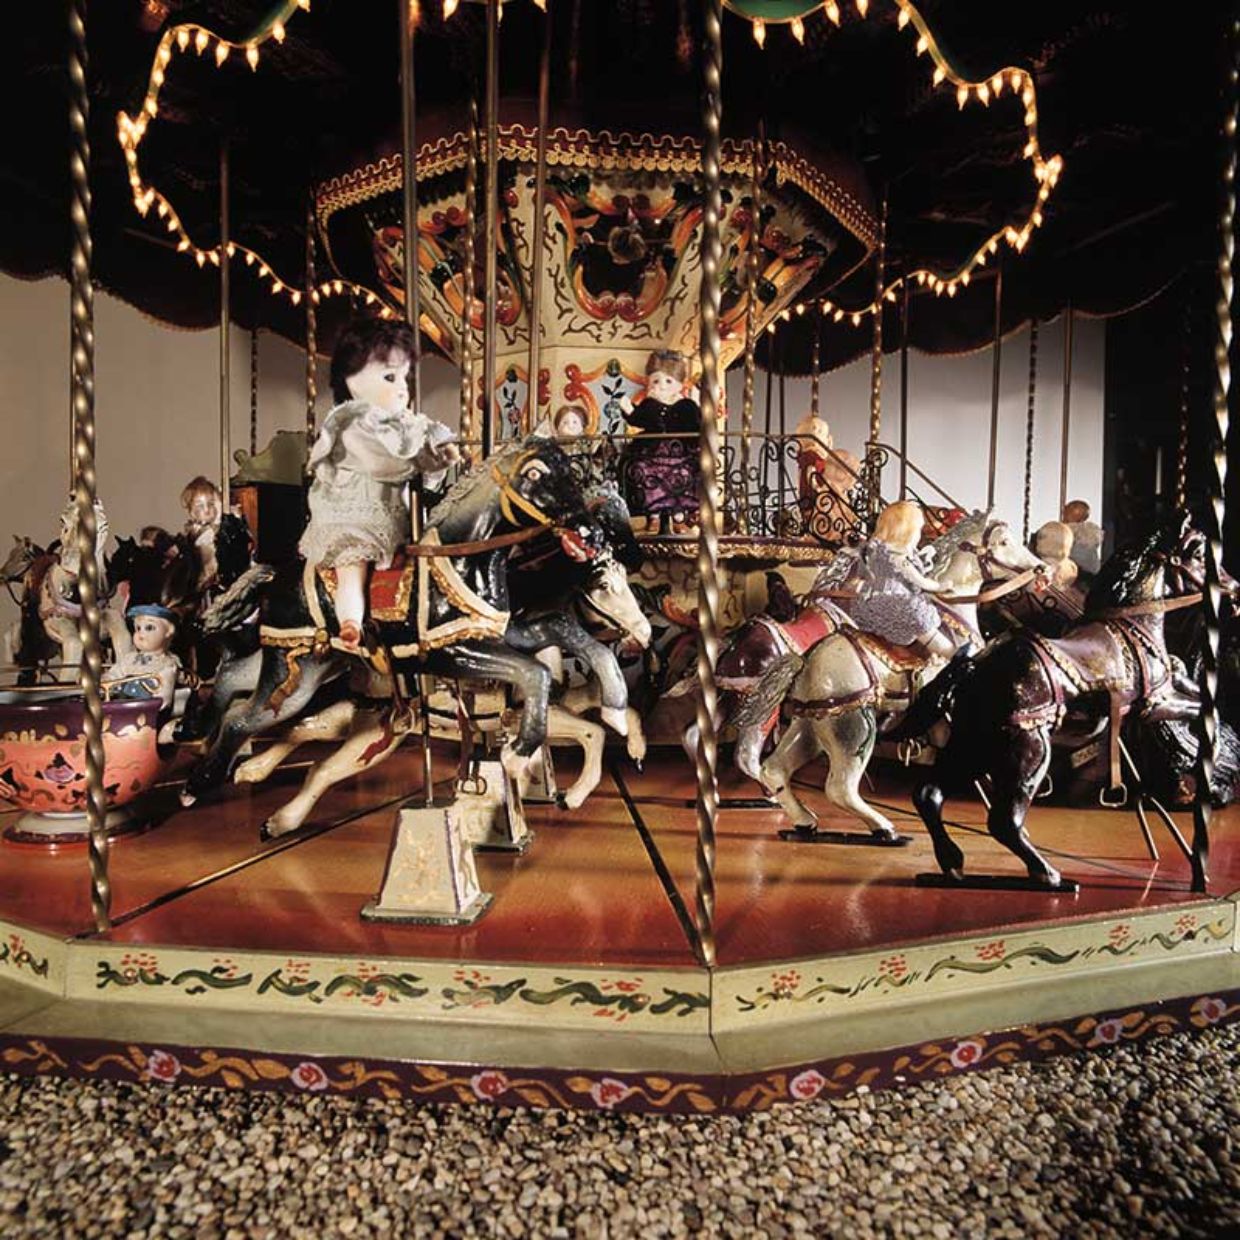 Carrousel, 1900, Other countries